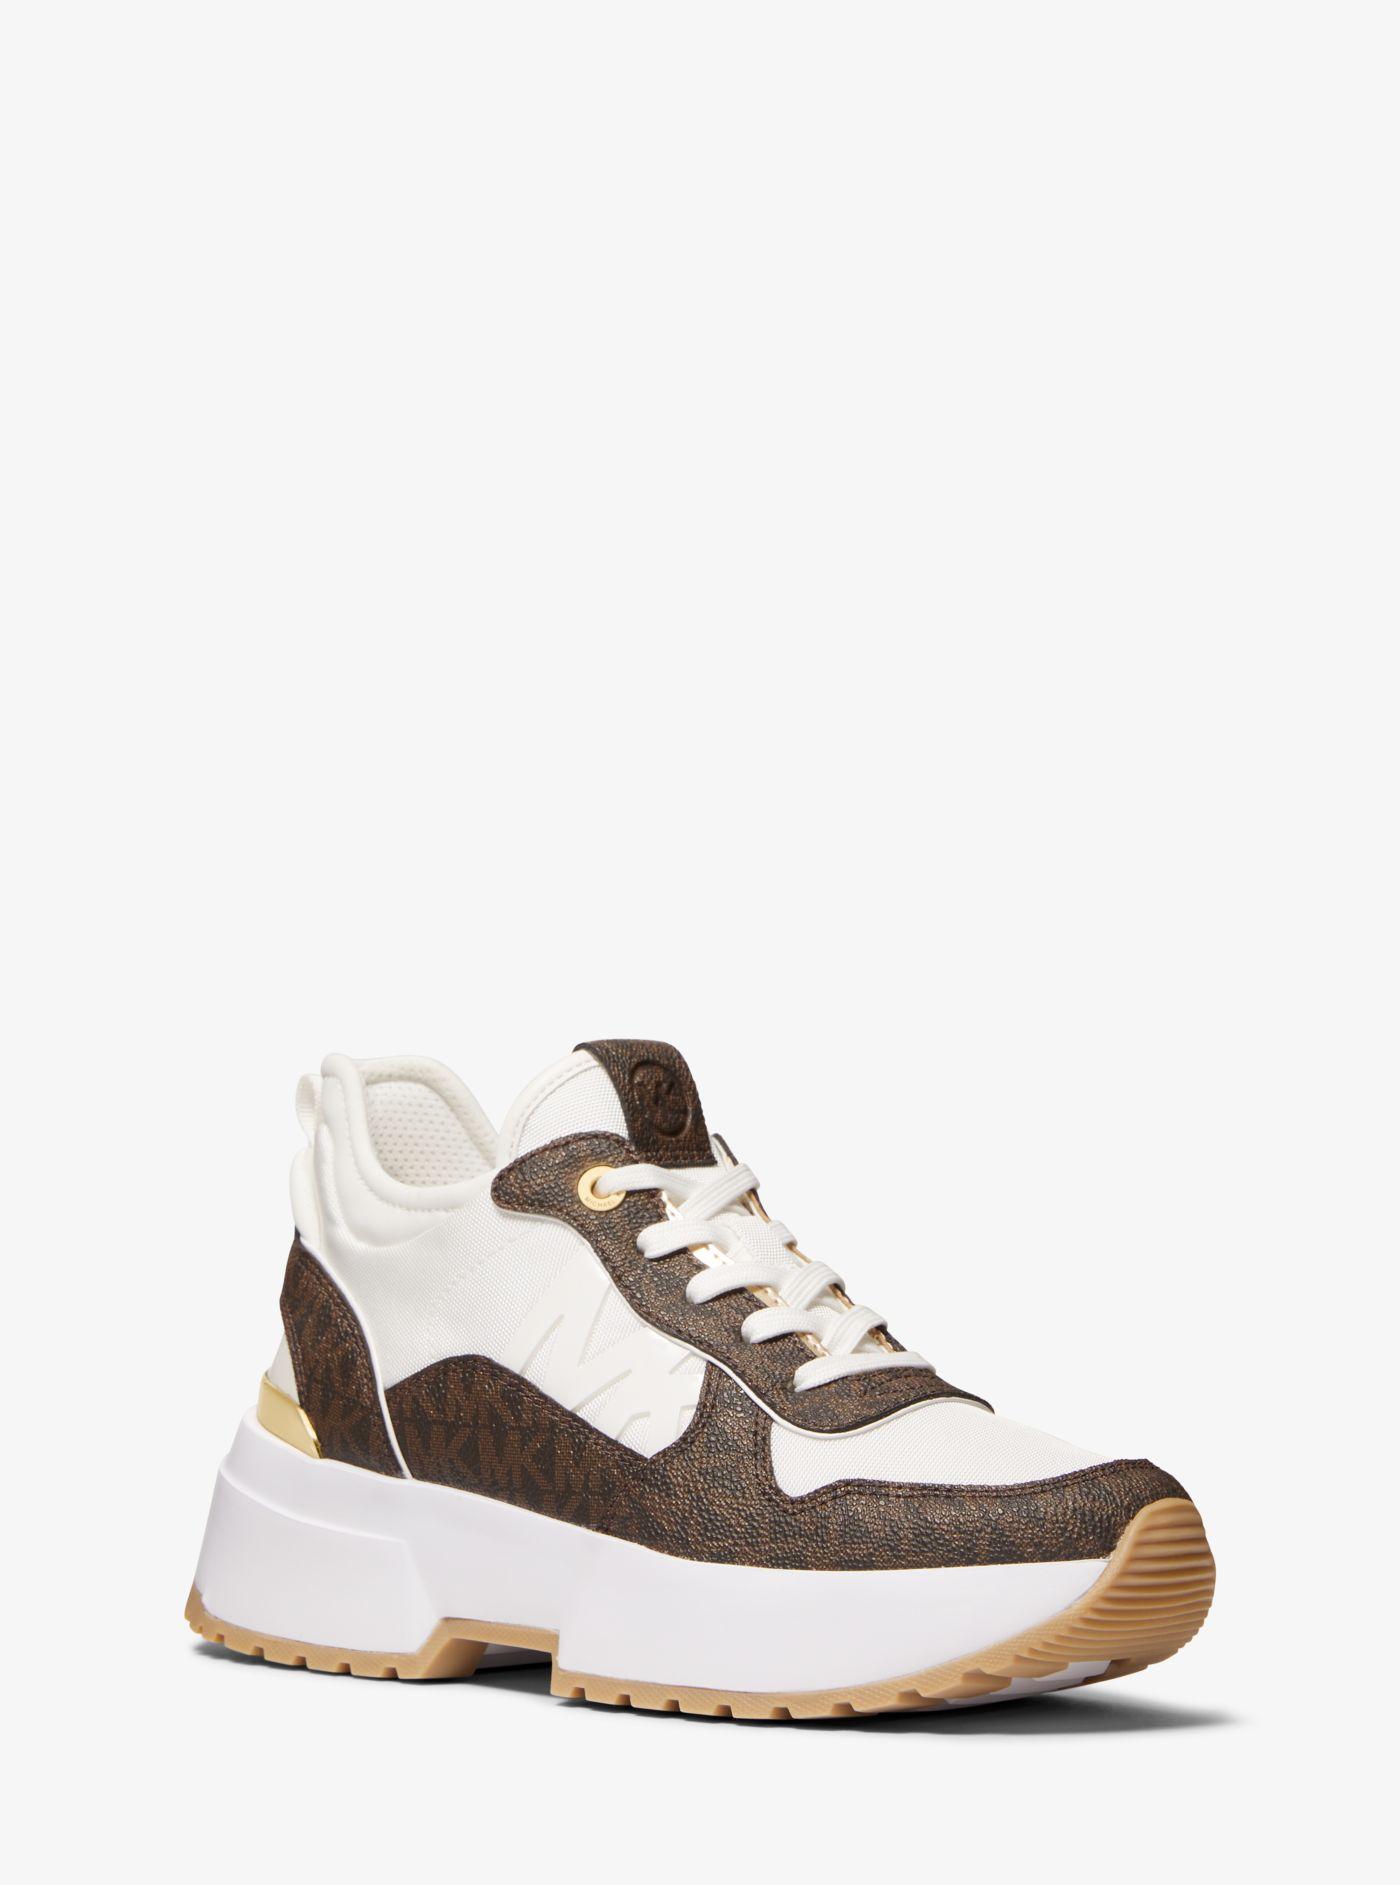 Michael Kors Muse Logo And Mesh Trainer in Brown | Lyst